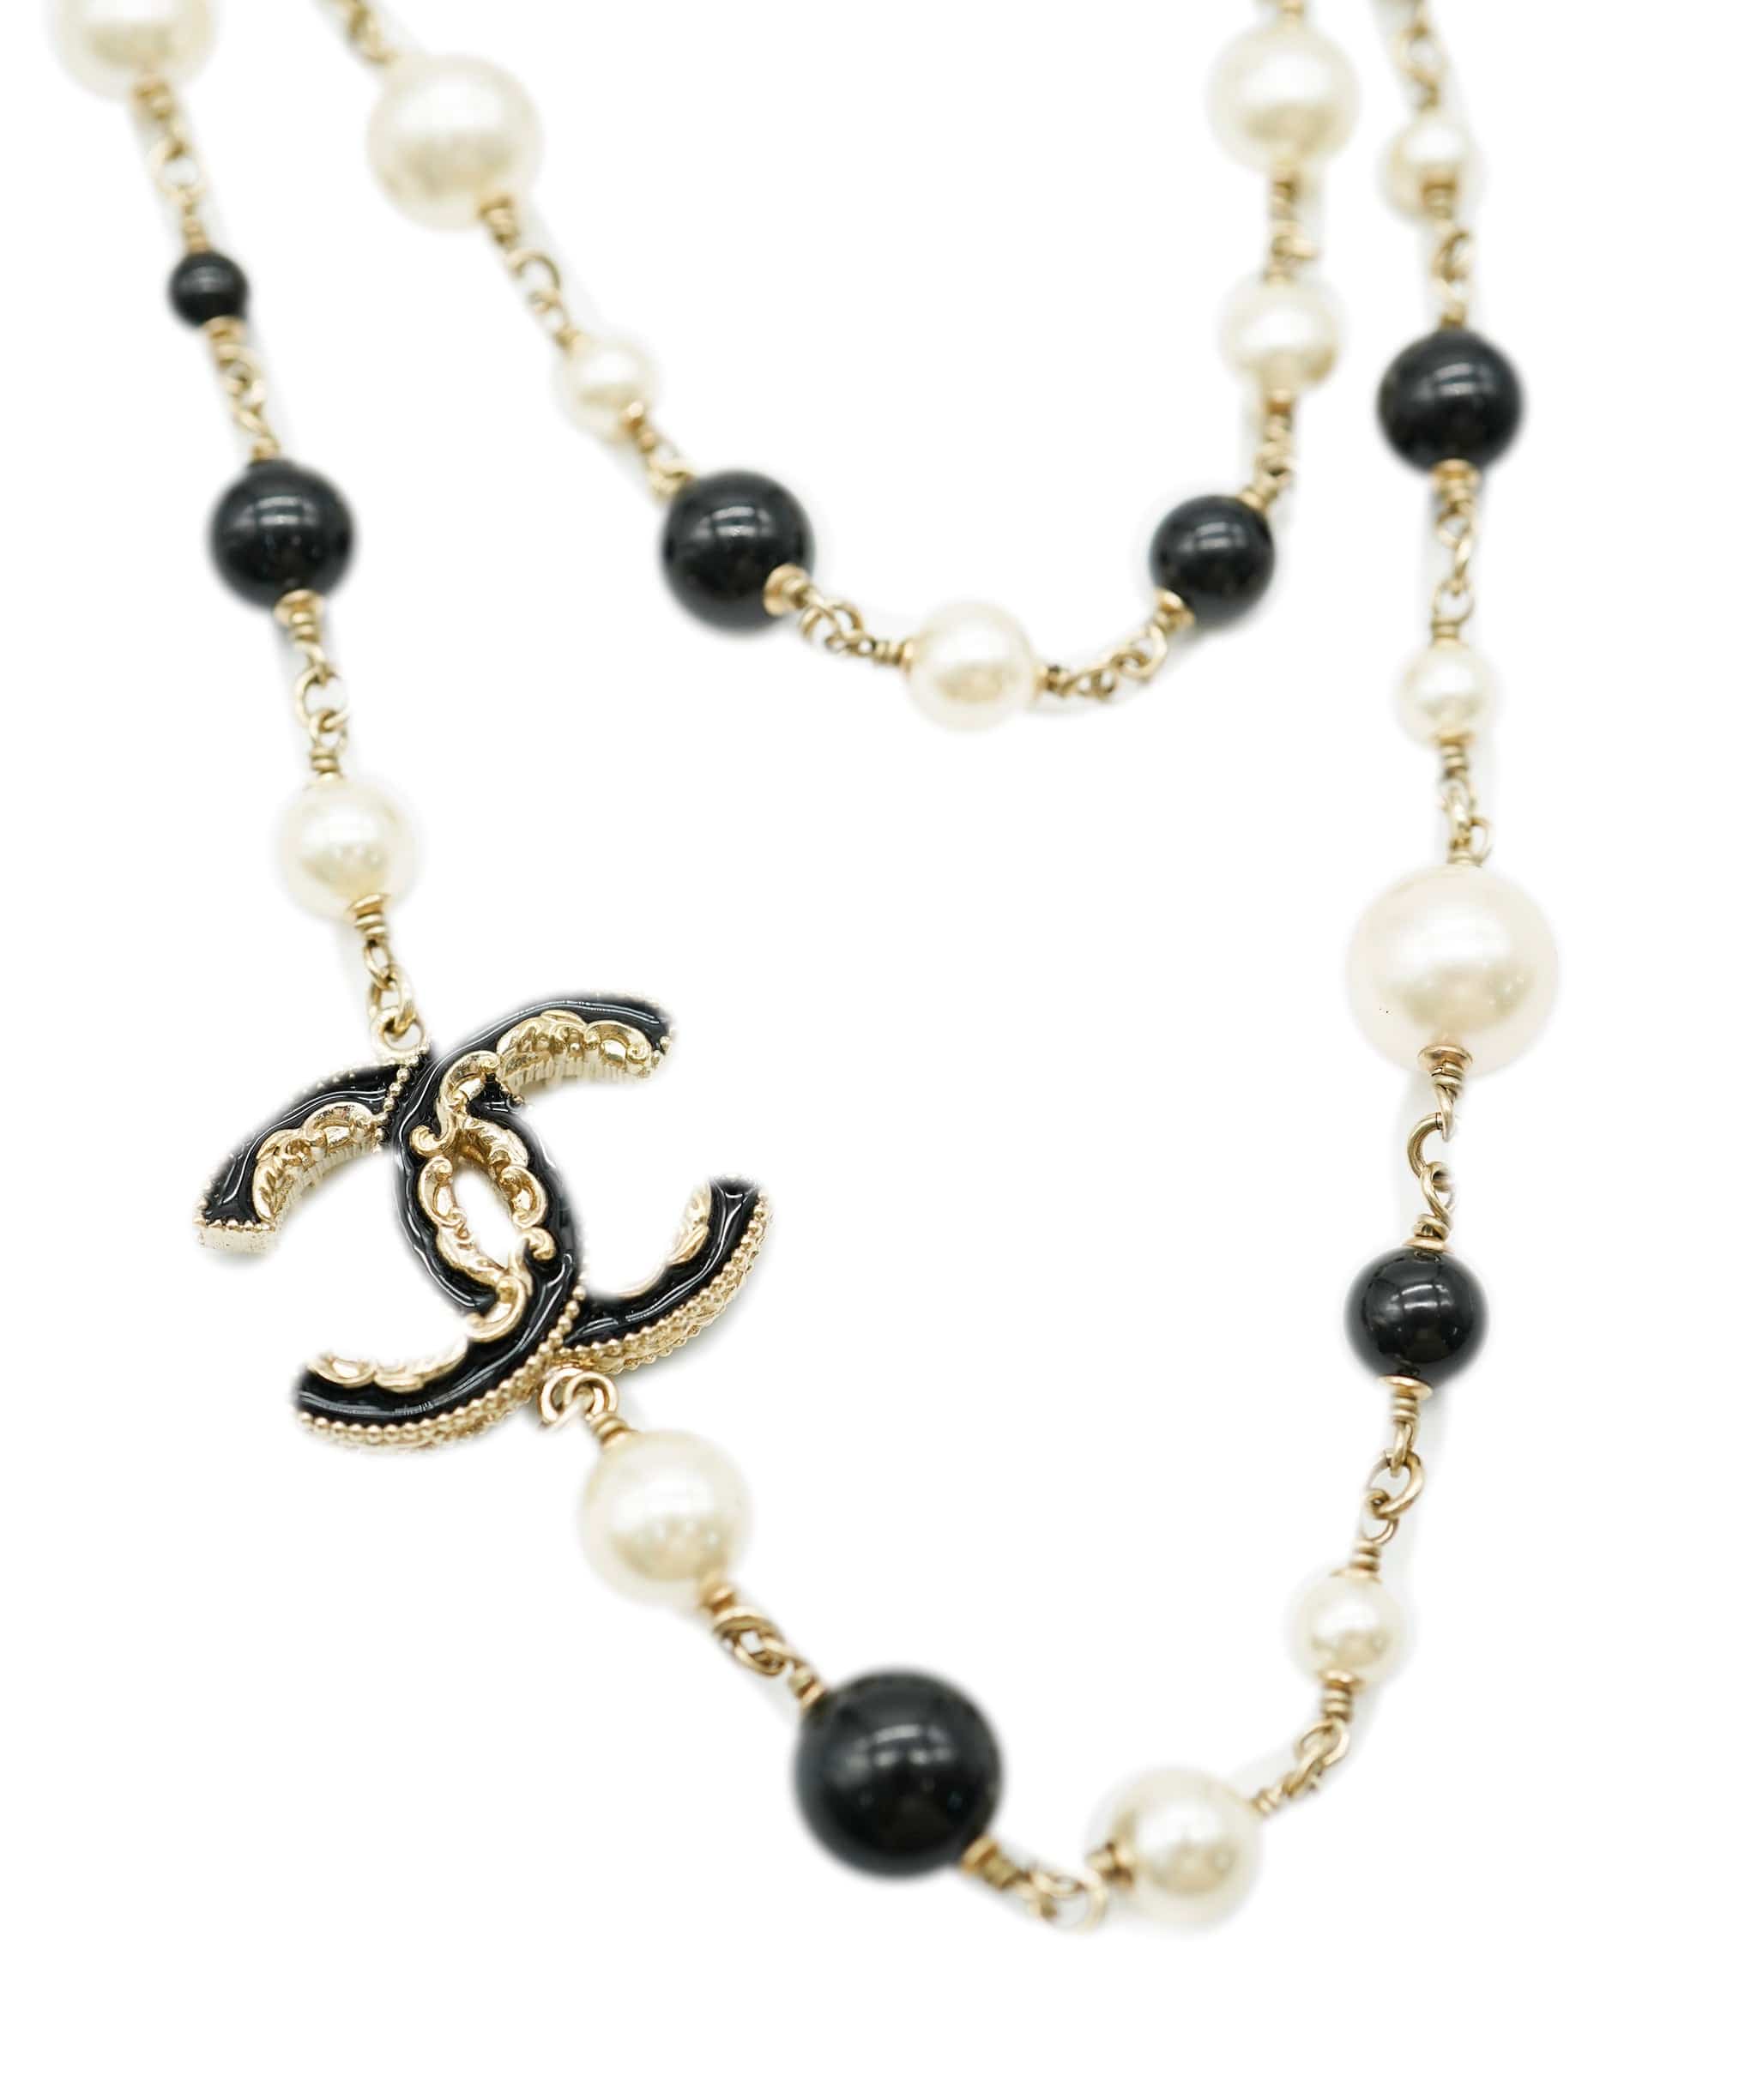 Cc pearl necklace Chanel Black in Pearl - 36483404